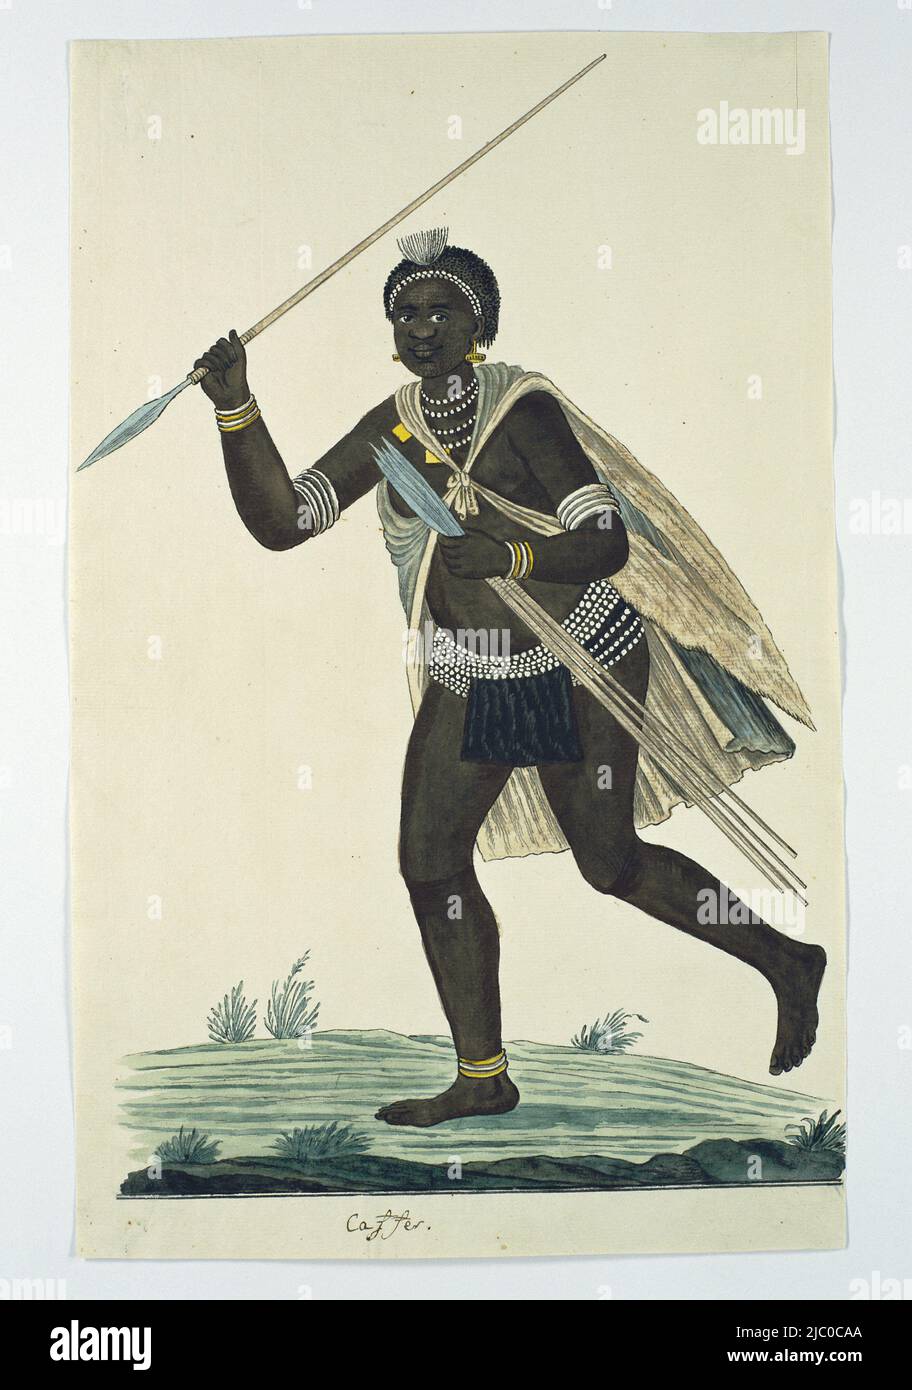 Xhosa warrior with an assegaai in his raised right hand and four in his left hand, Running man holding an assegai in his right hand and four assegais in his left., draughtsman: Robert Jacob Gordon, Cape of Good Hope, 1776 - 1795, paper, pen, brush, h 660 mm × w 480 mm, h 360 mm × w 225 mm Stock Photo